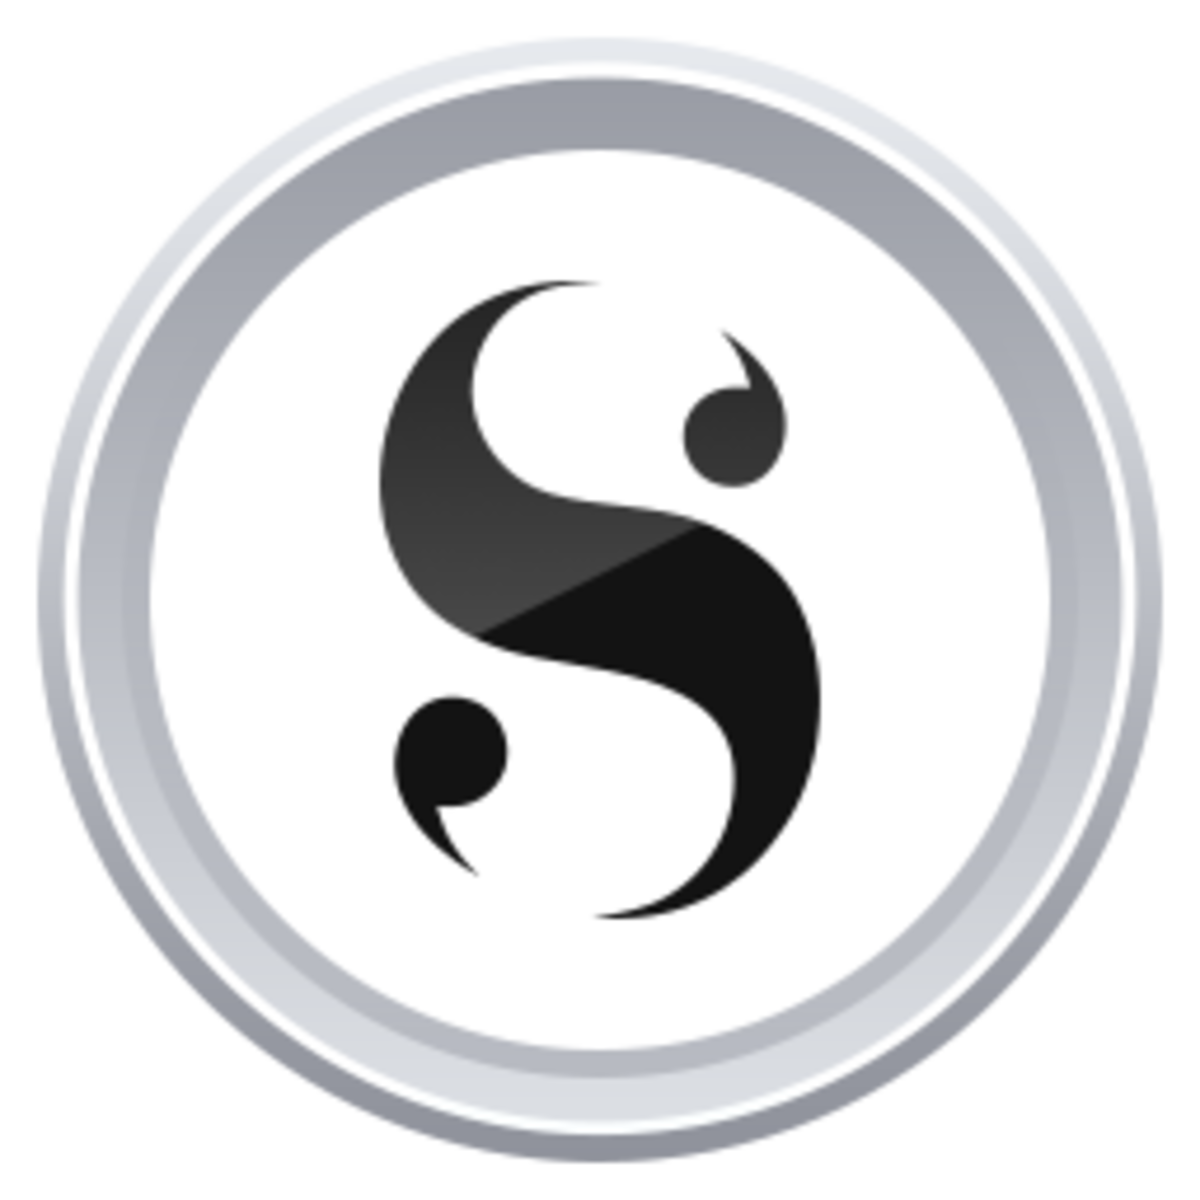 World-Building and Writing Software Review: Scrivener